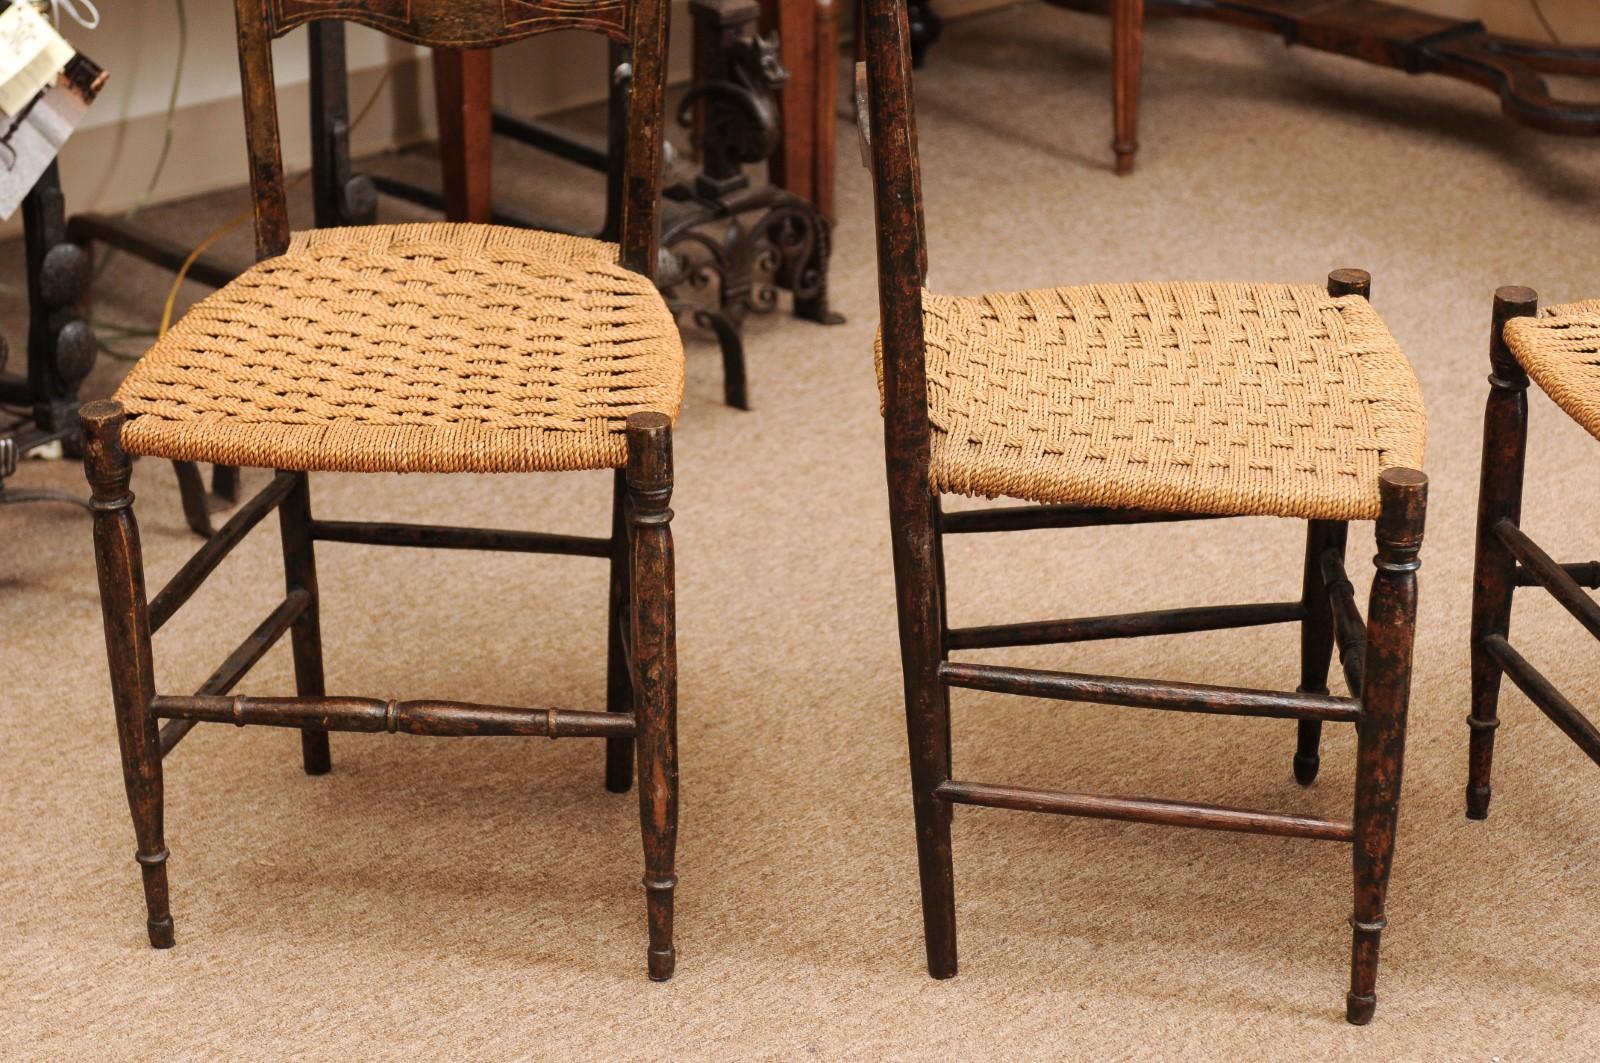 Pair of Neoclassical Black Painted Side Chairs with Woven Seats, Italy ca. 1790 For Sale 4